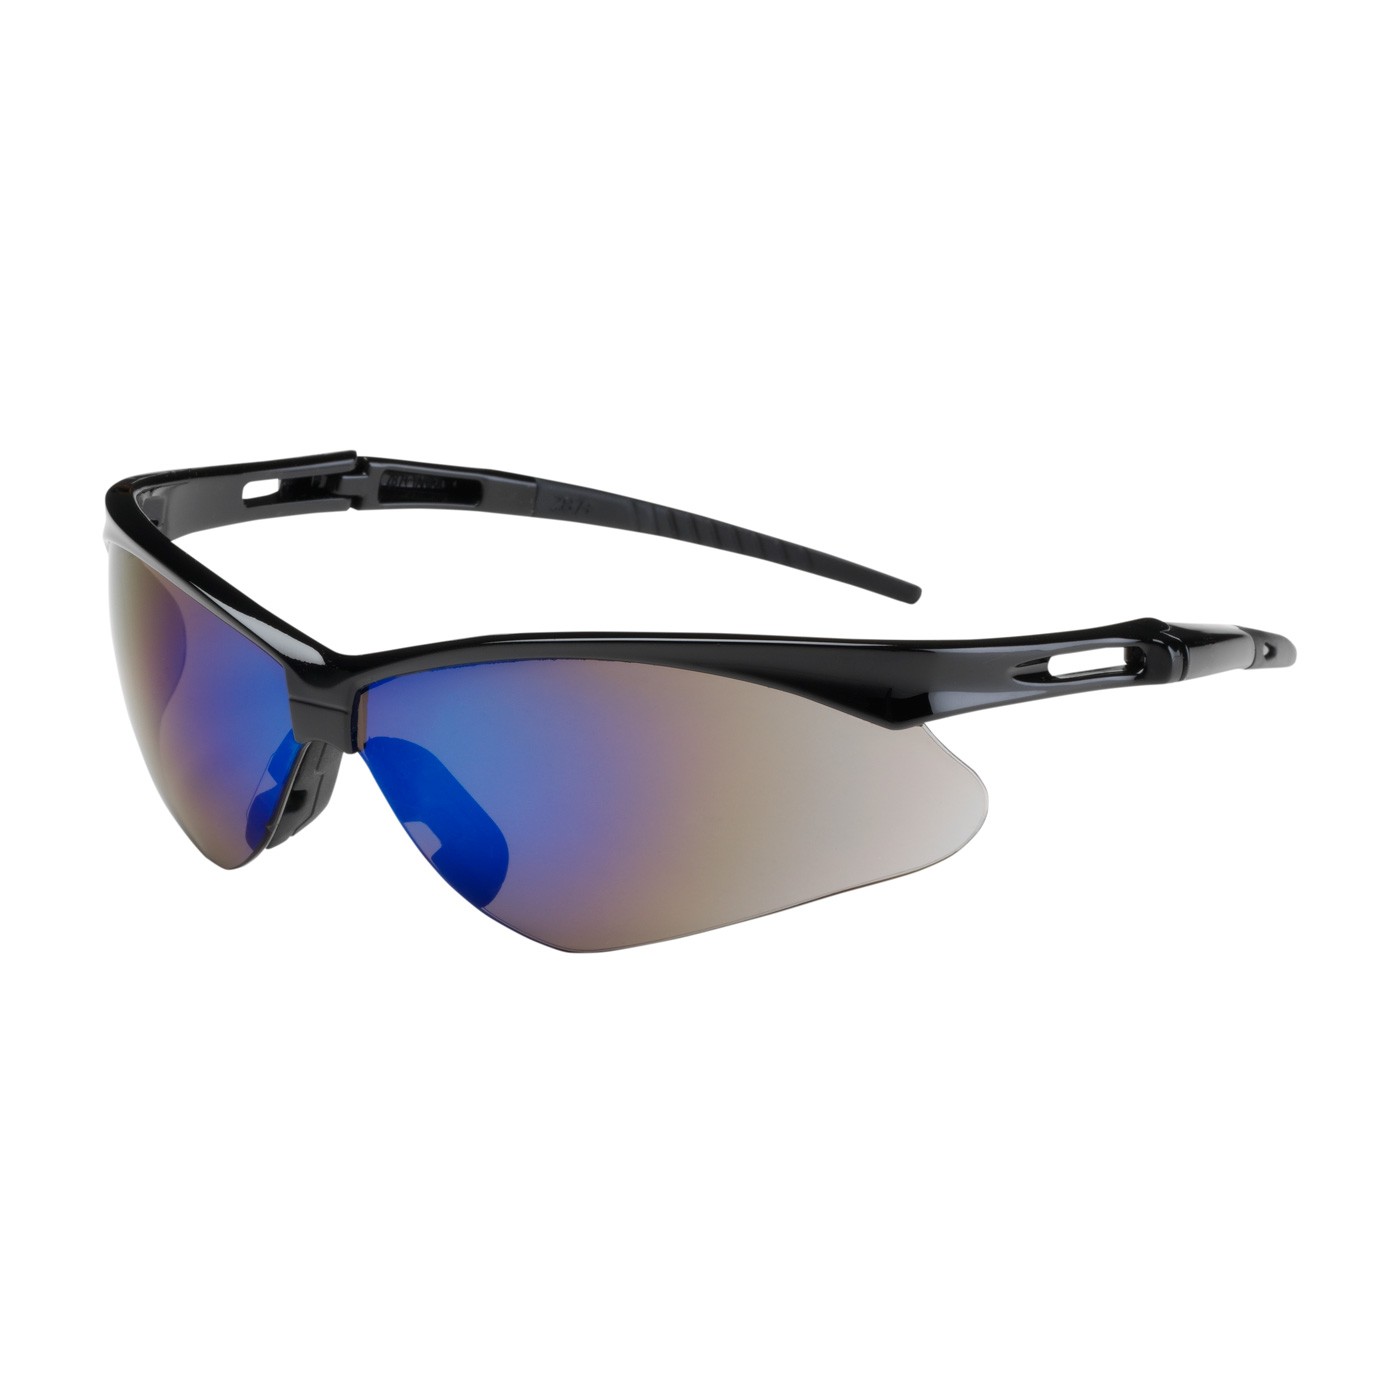 Anser™ Semi-Rimless Safety Glasses with Black Frame, Blue Mirror Lens and Anti-Scratch Coating  (#250-AN-10115)